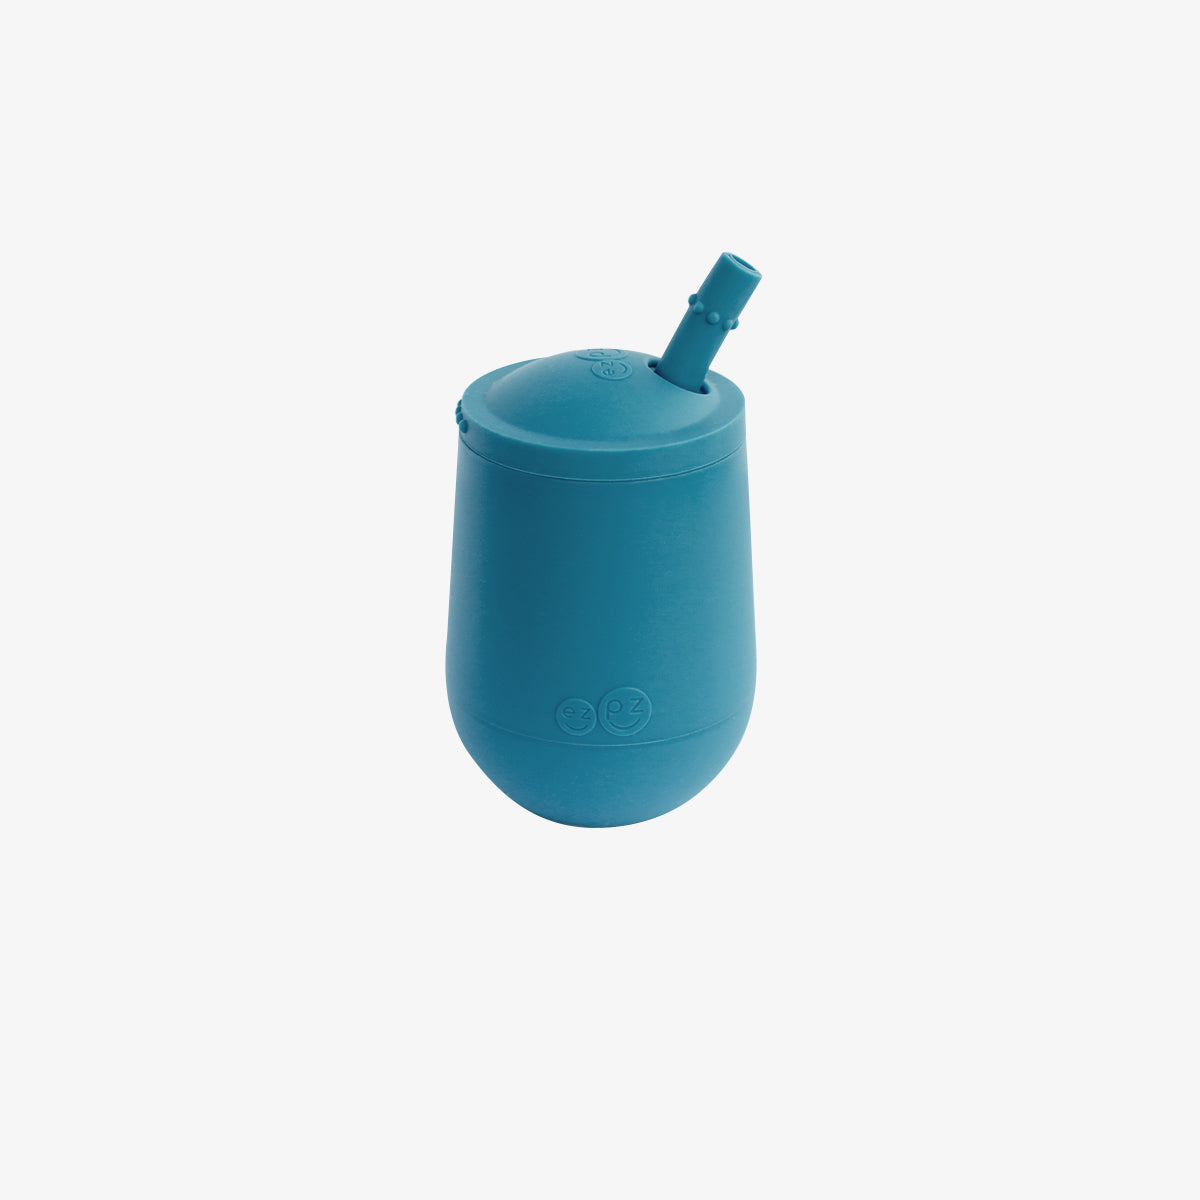 The Mini Cup + Straw in Blue by ezpz / Silicone Drinking Cup and Straw Training System for Toddlers